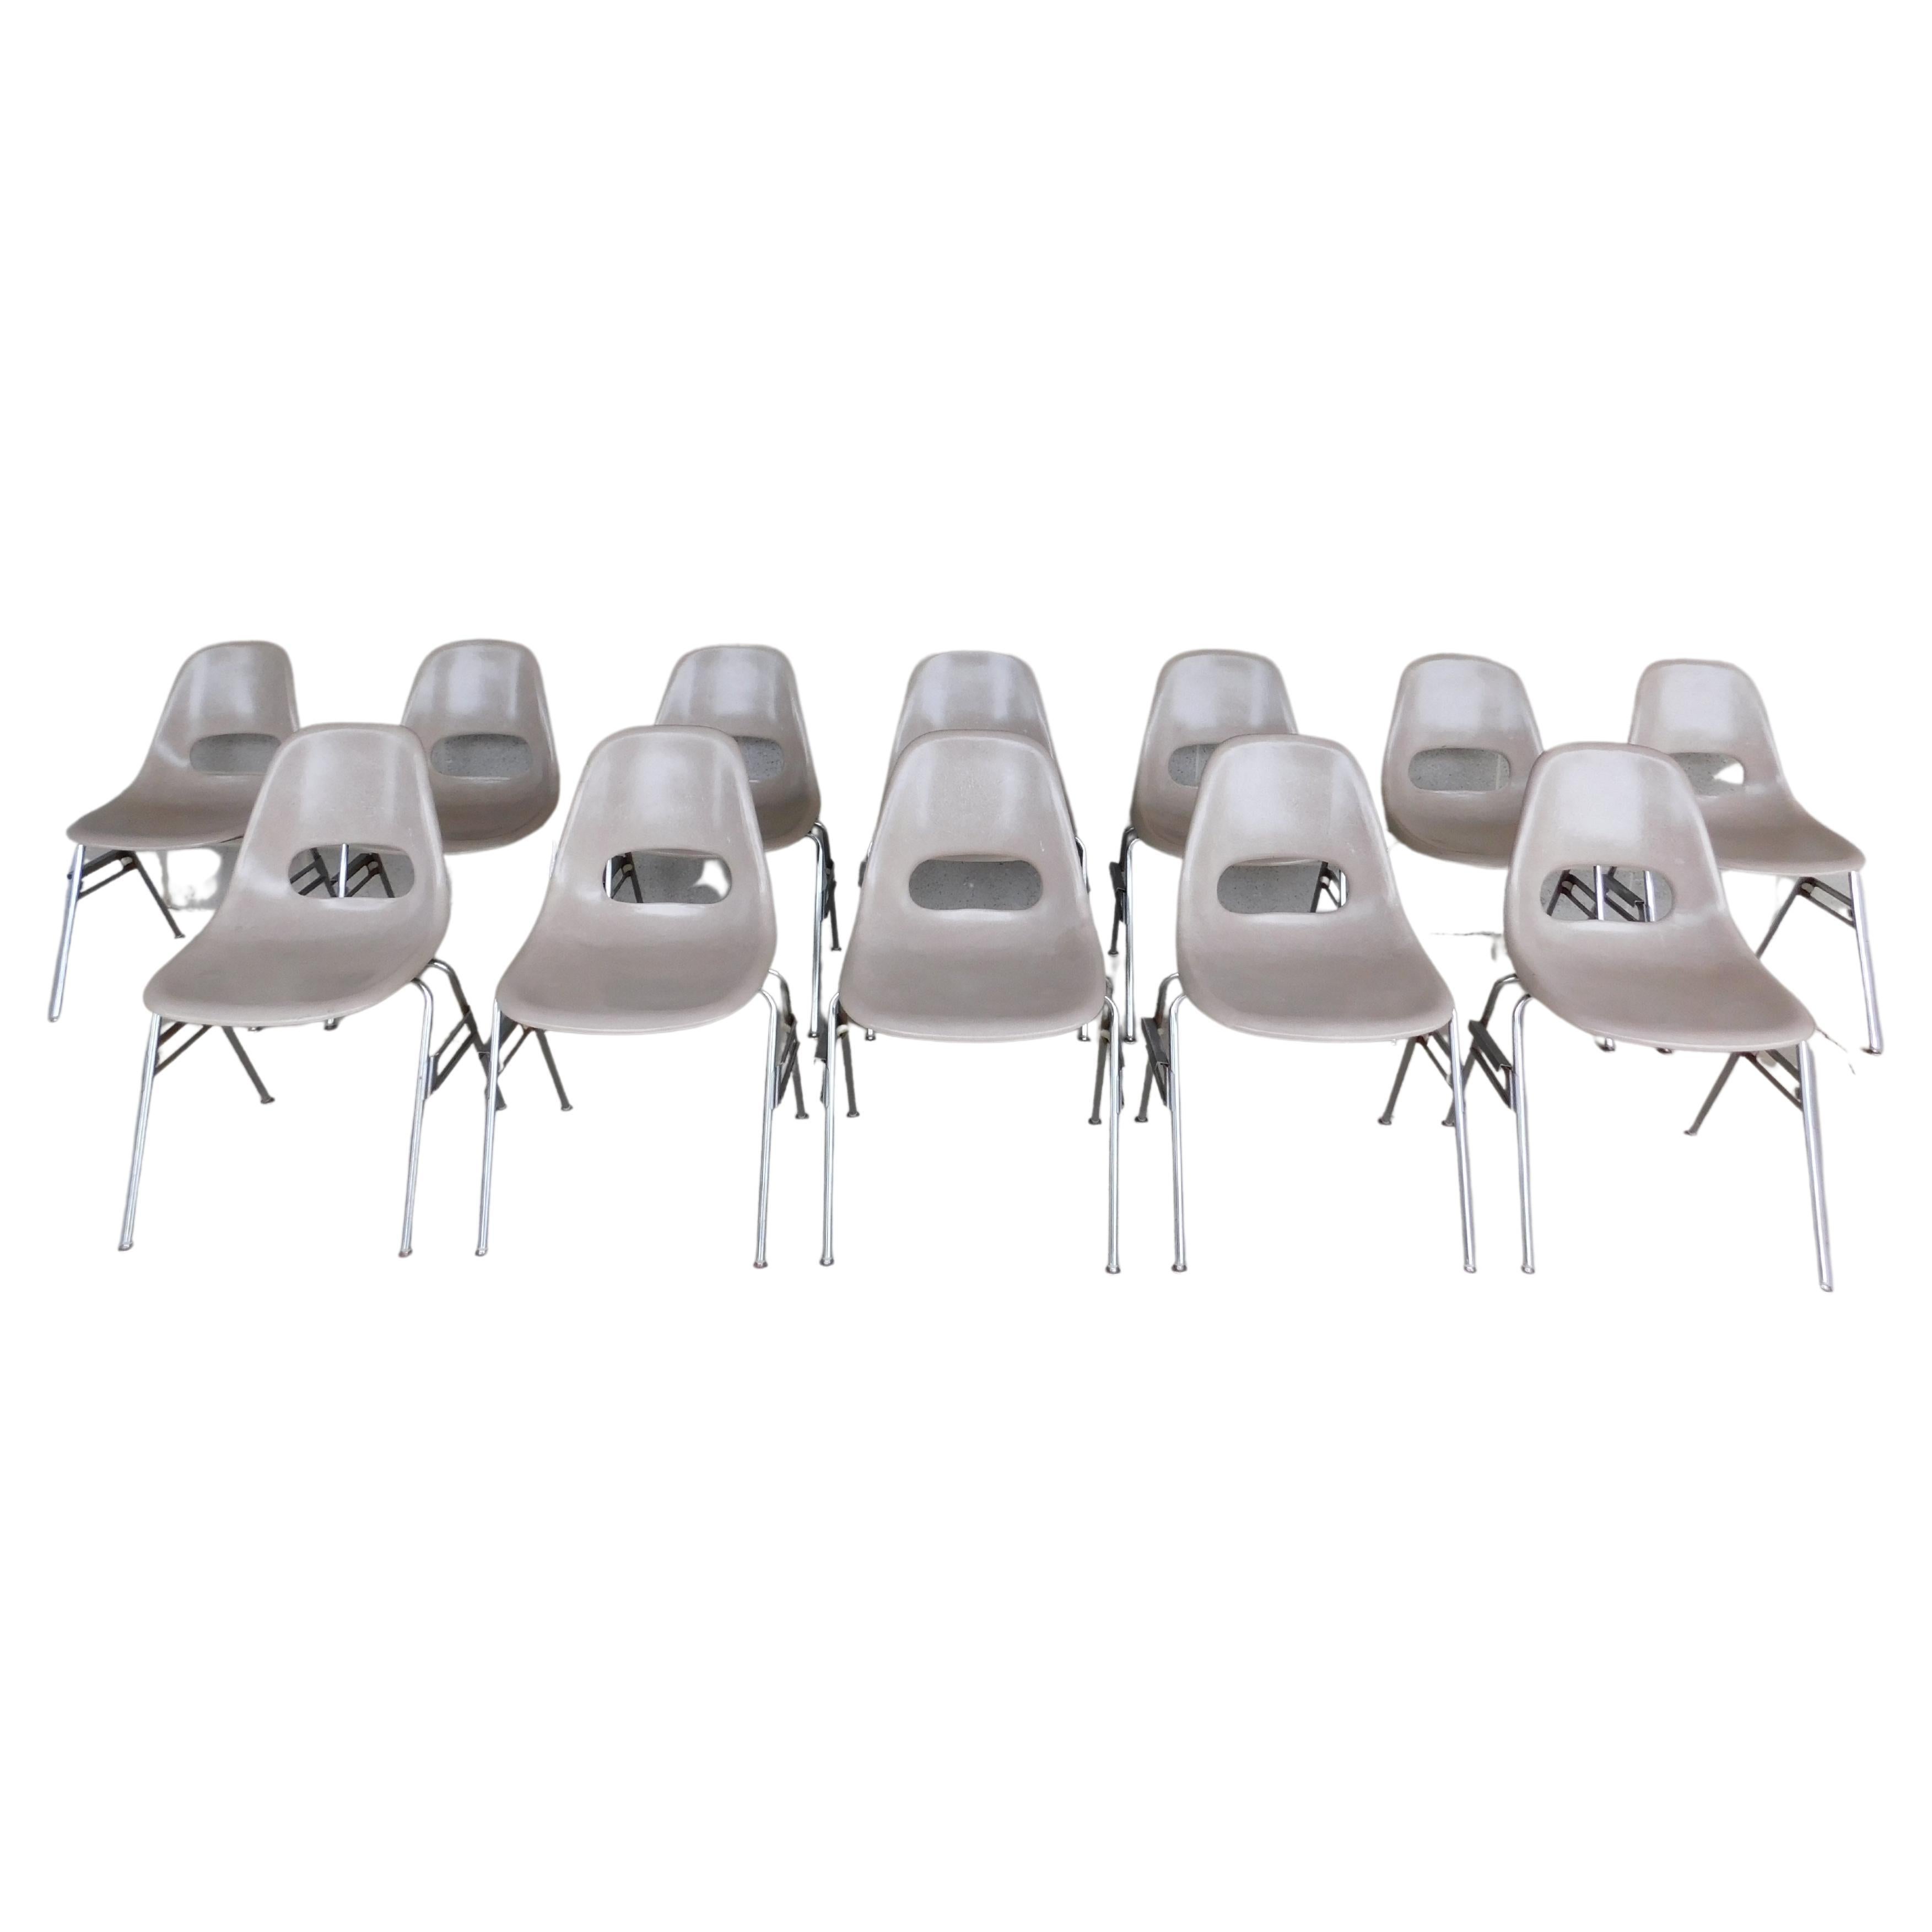 Krueger Metal Products Taupe Color Fiberglass Chairs Set of 12 For Sale